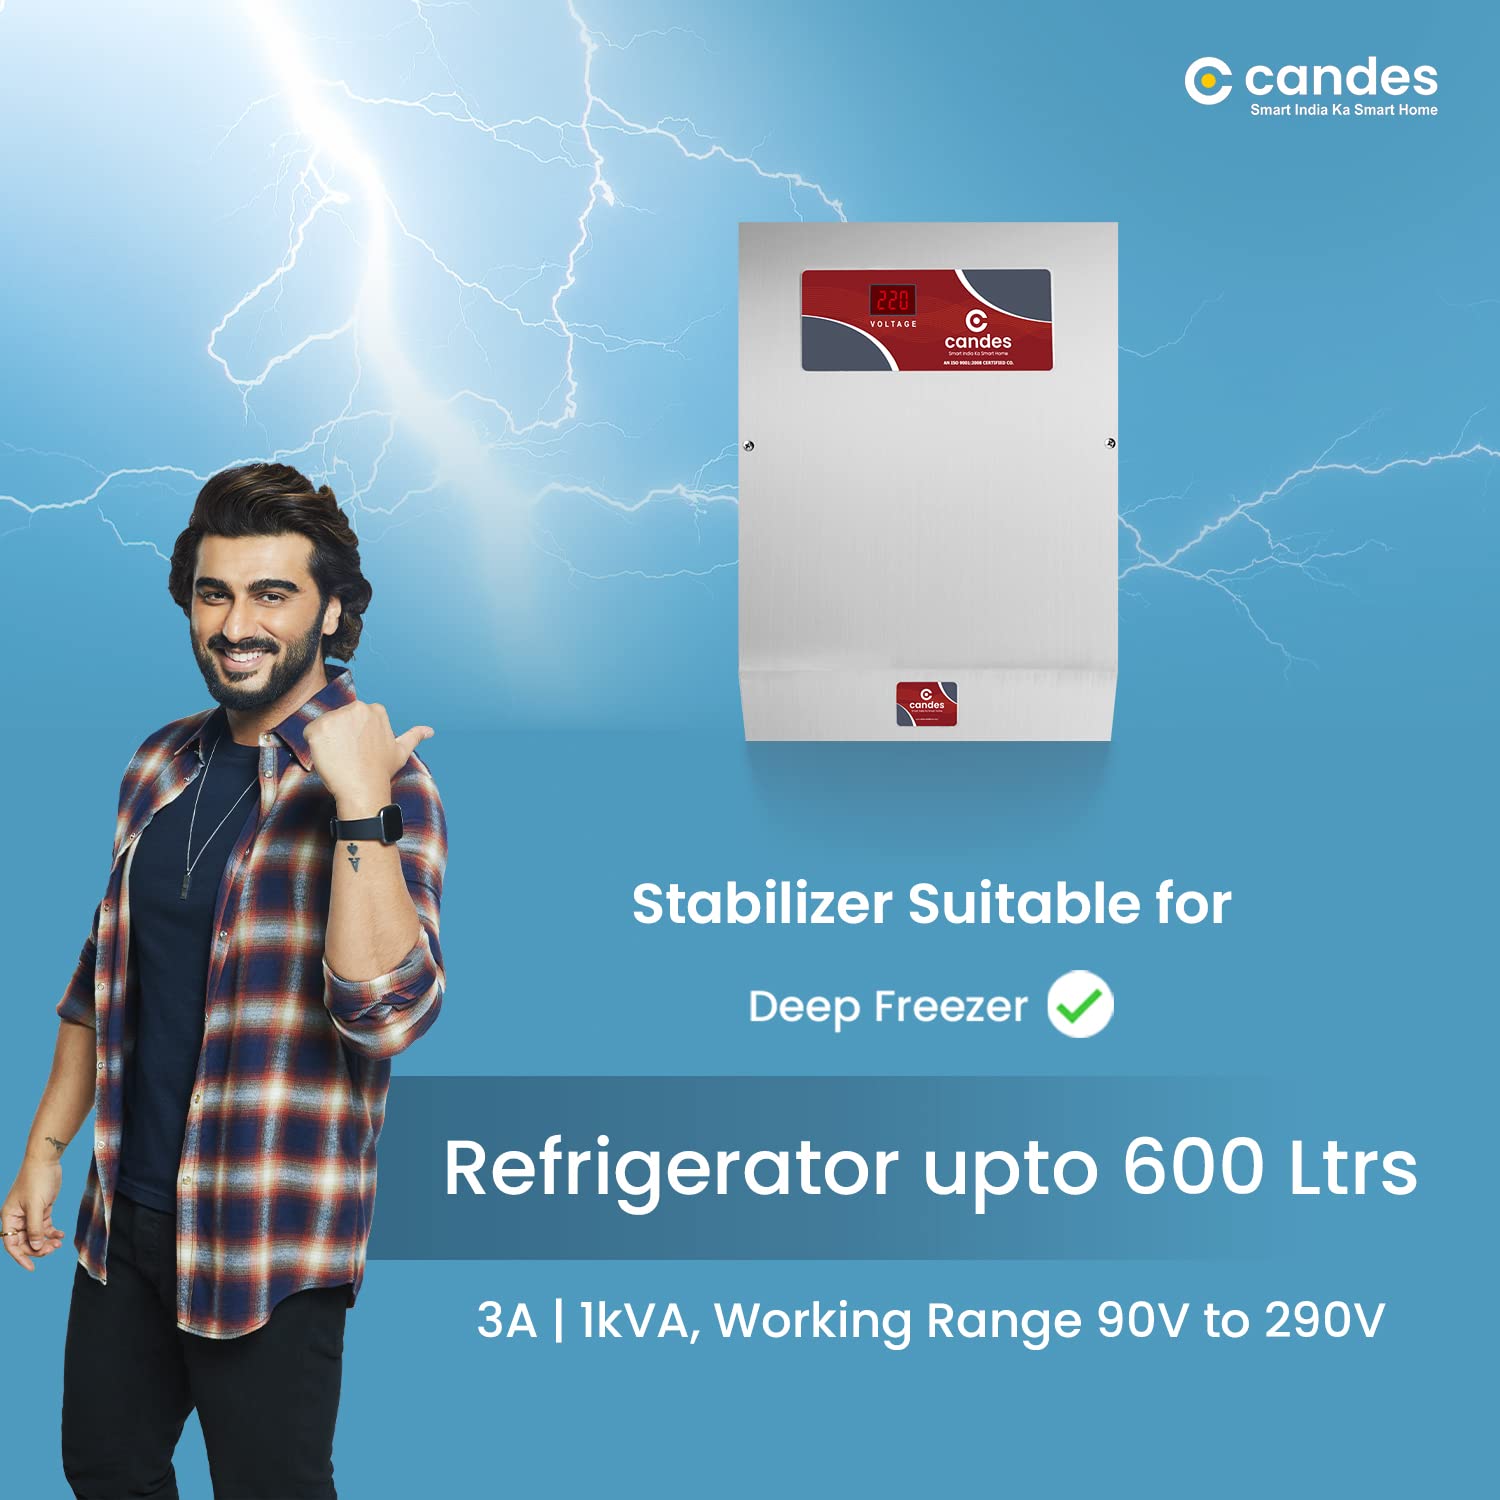 Candes Deep Refrigerator/Fridge Upto 600 Ltrs Voltage Stabilizer with Stainless Steel Body & Wide Working Range Best (Grey, 600 litres, 90V to 190V) 3+2 Years Warranty